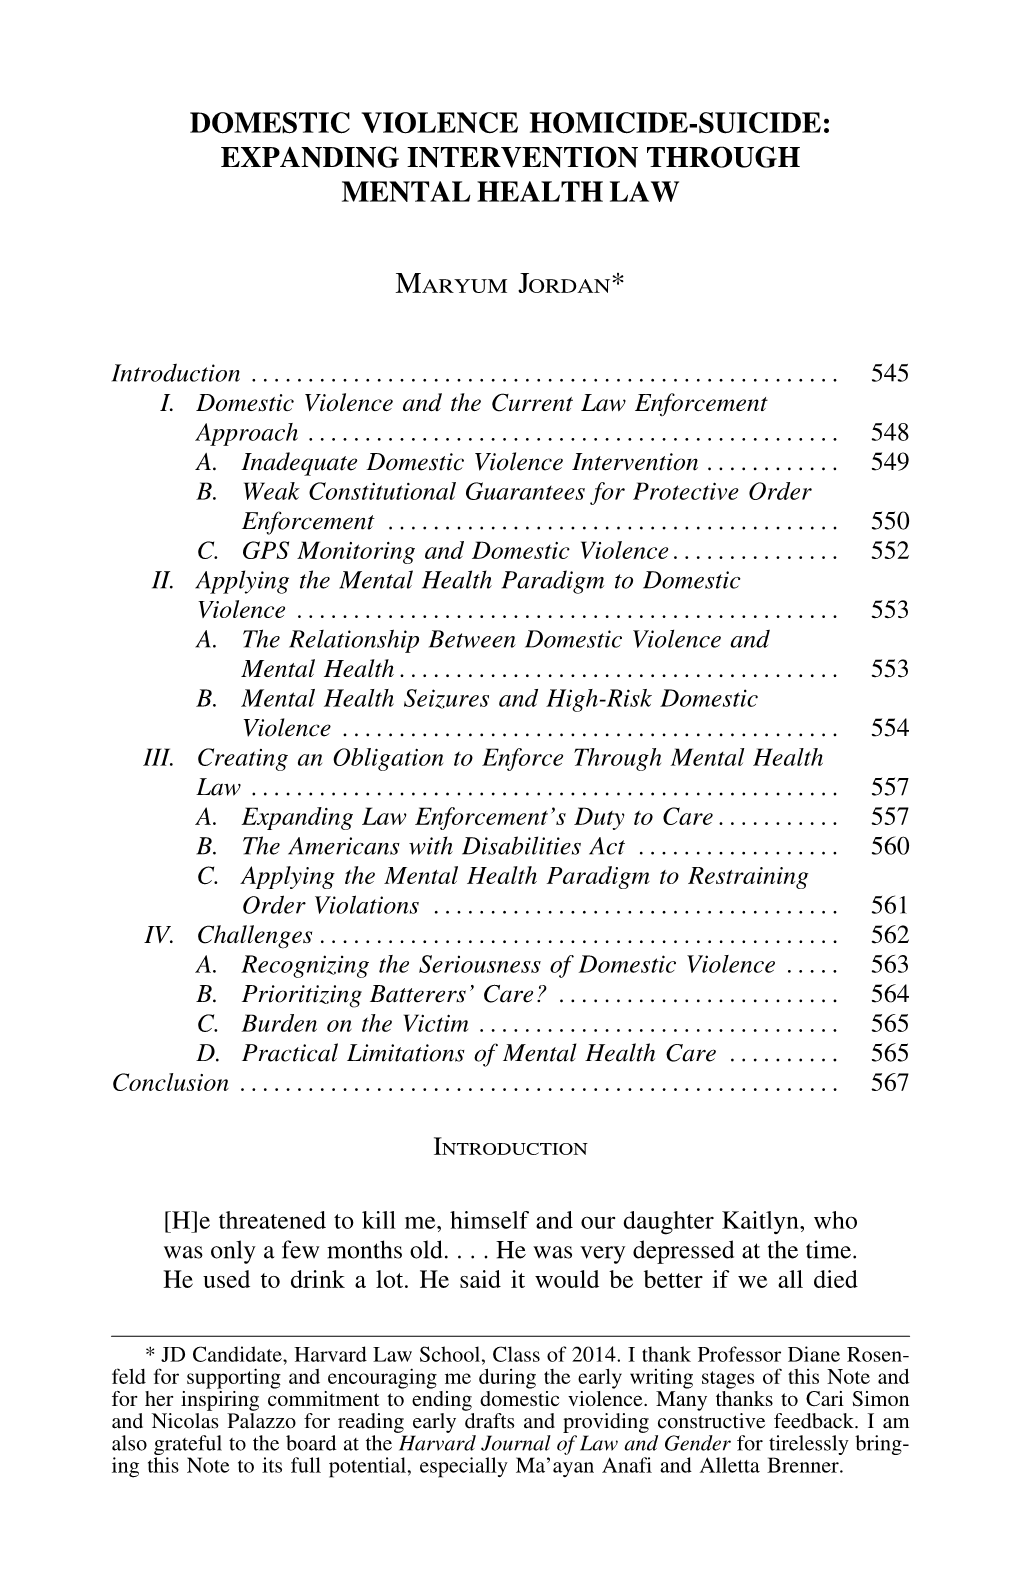 Domestic Violence Homicide-Suicide: Expanding Intervention Through Mental Health Law